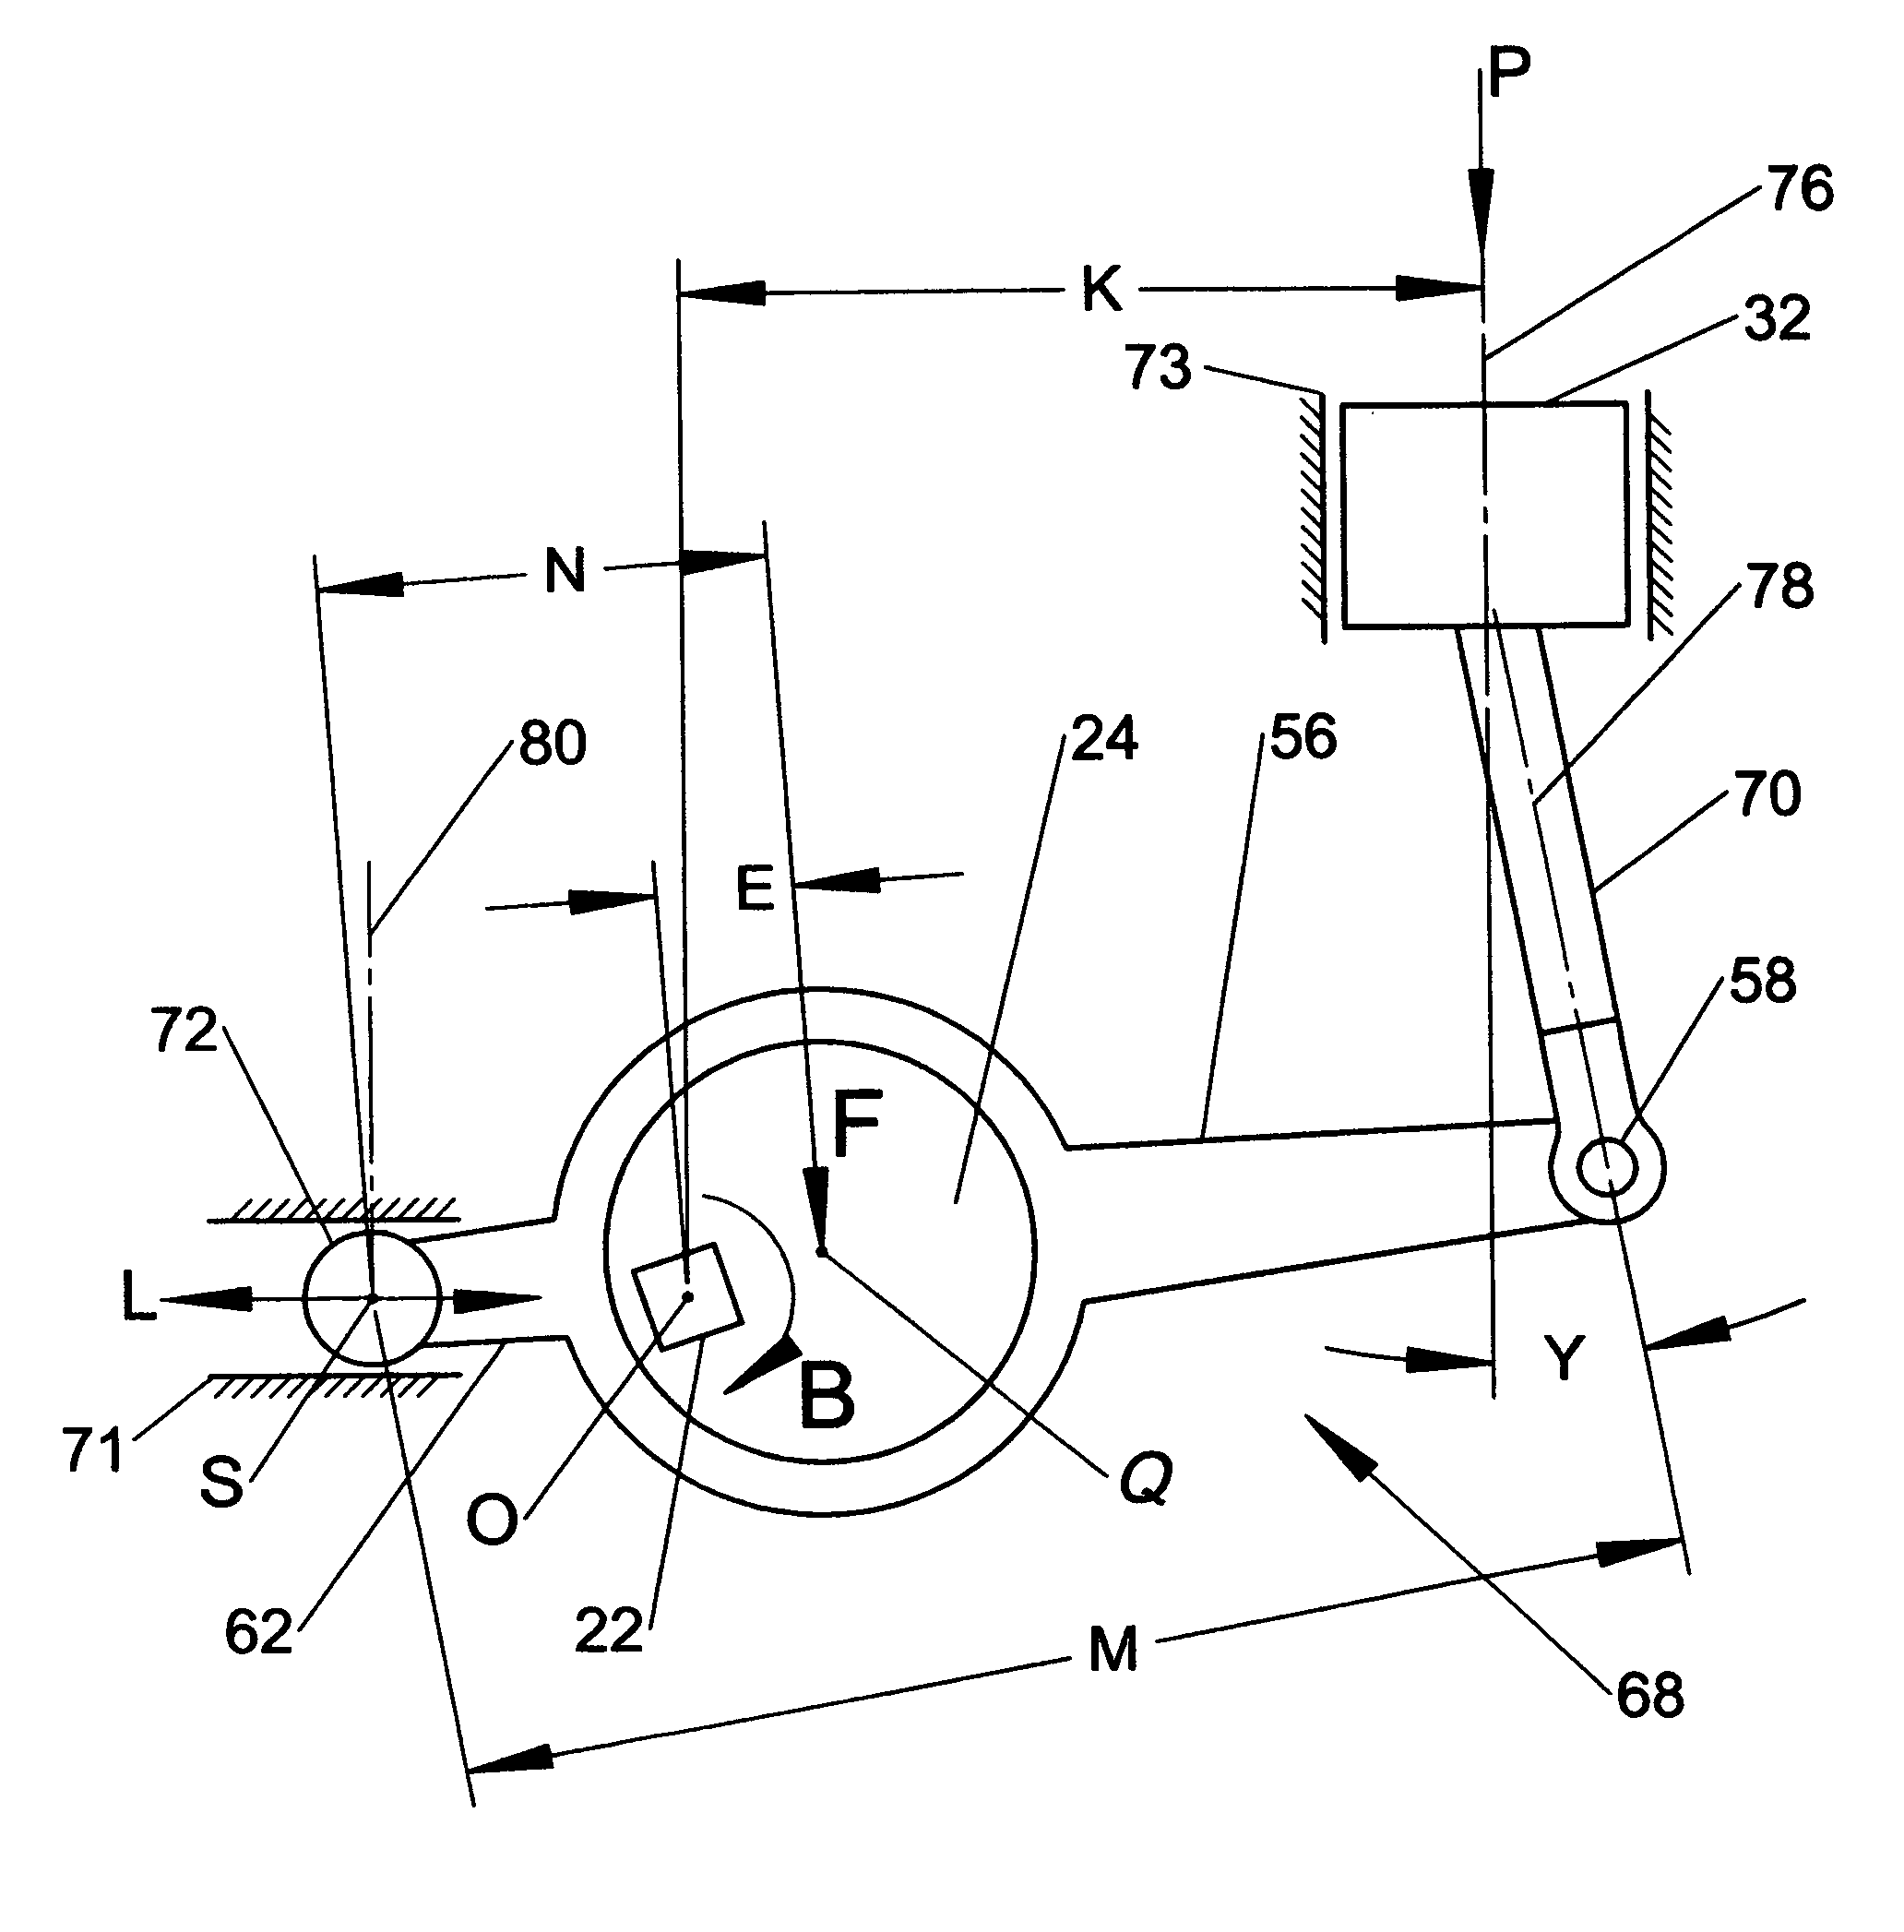 Reciprocating piston mechanism with extended piston offset